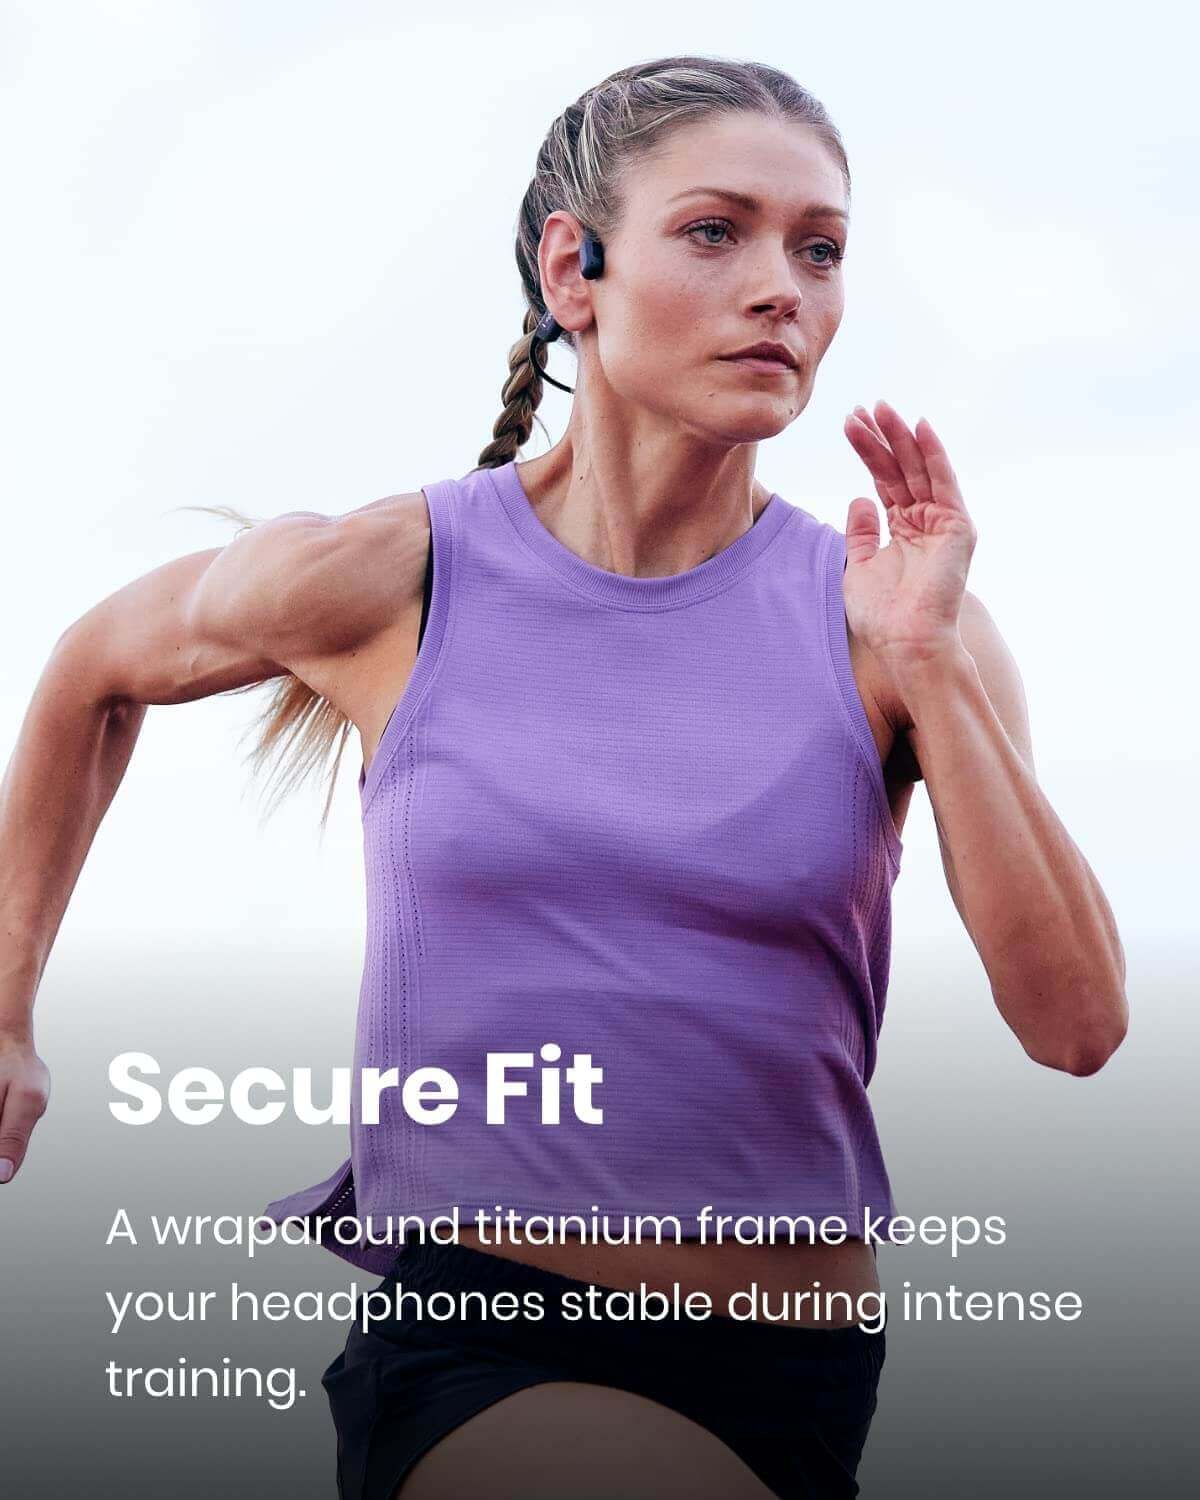 shokz openrun pro fitting securely on the head of a woman running outdoors